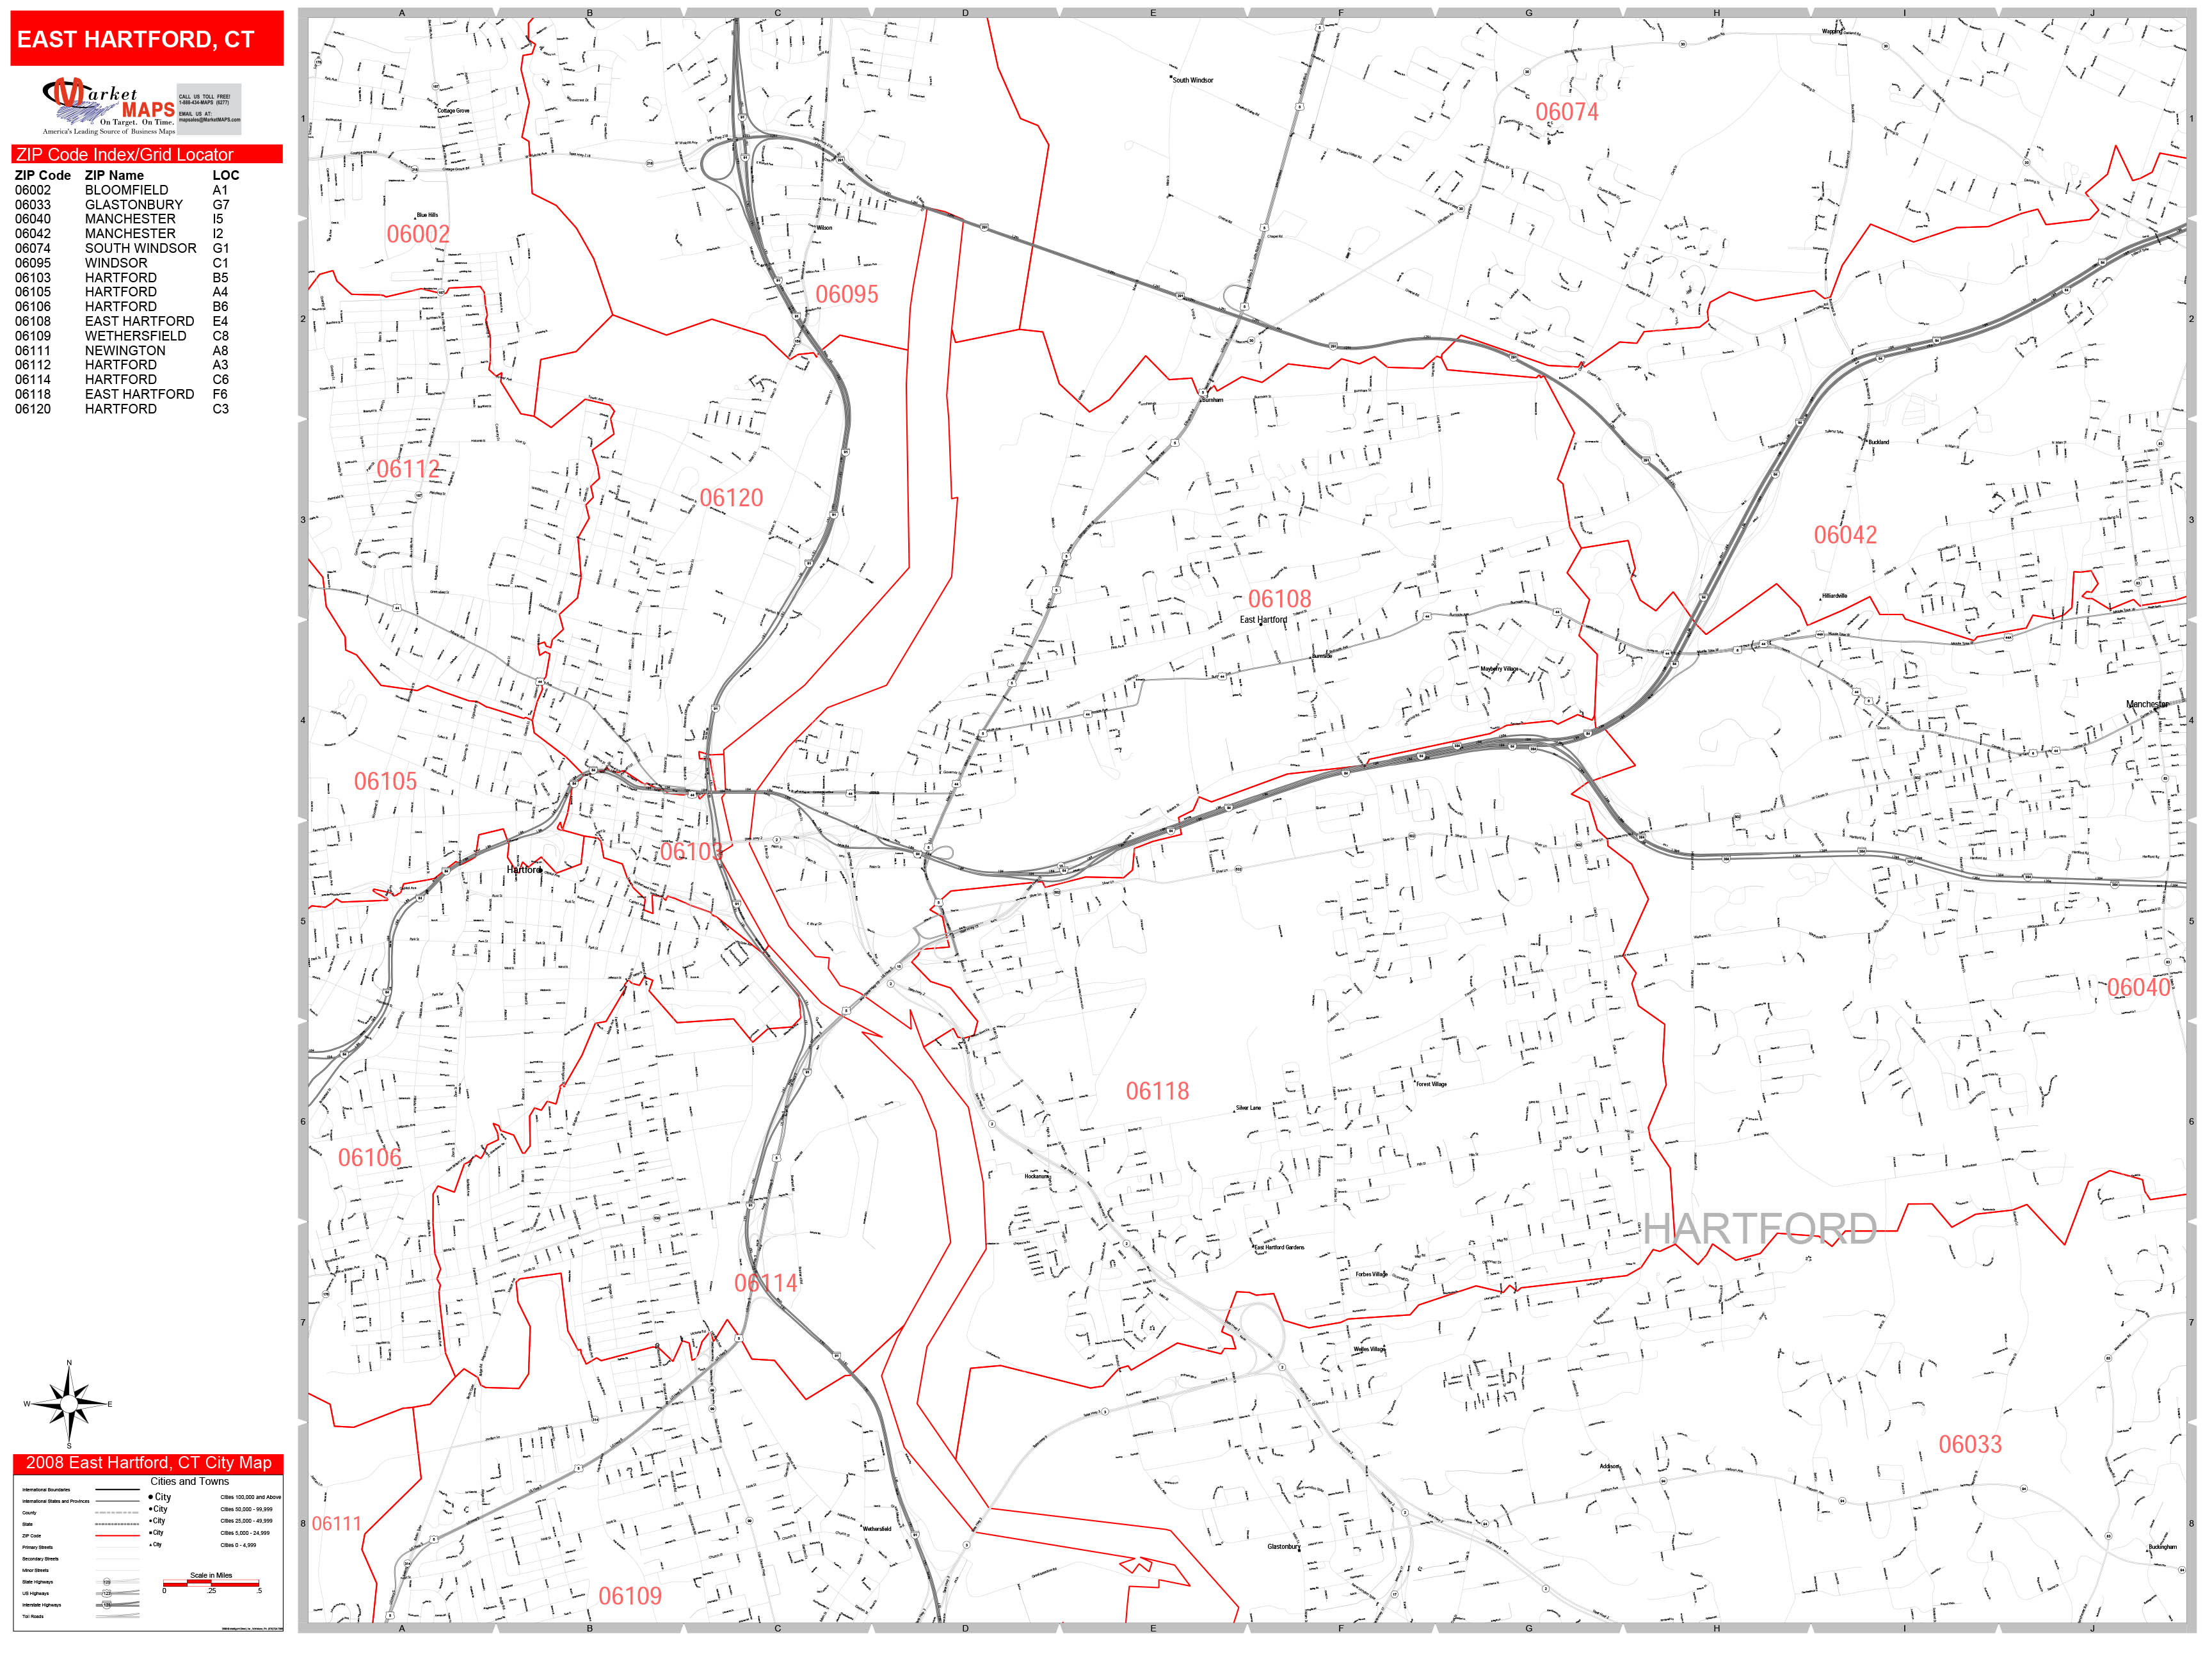 East Hartford Connecticut Zip Code Wall Map (Red Line